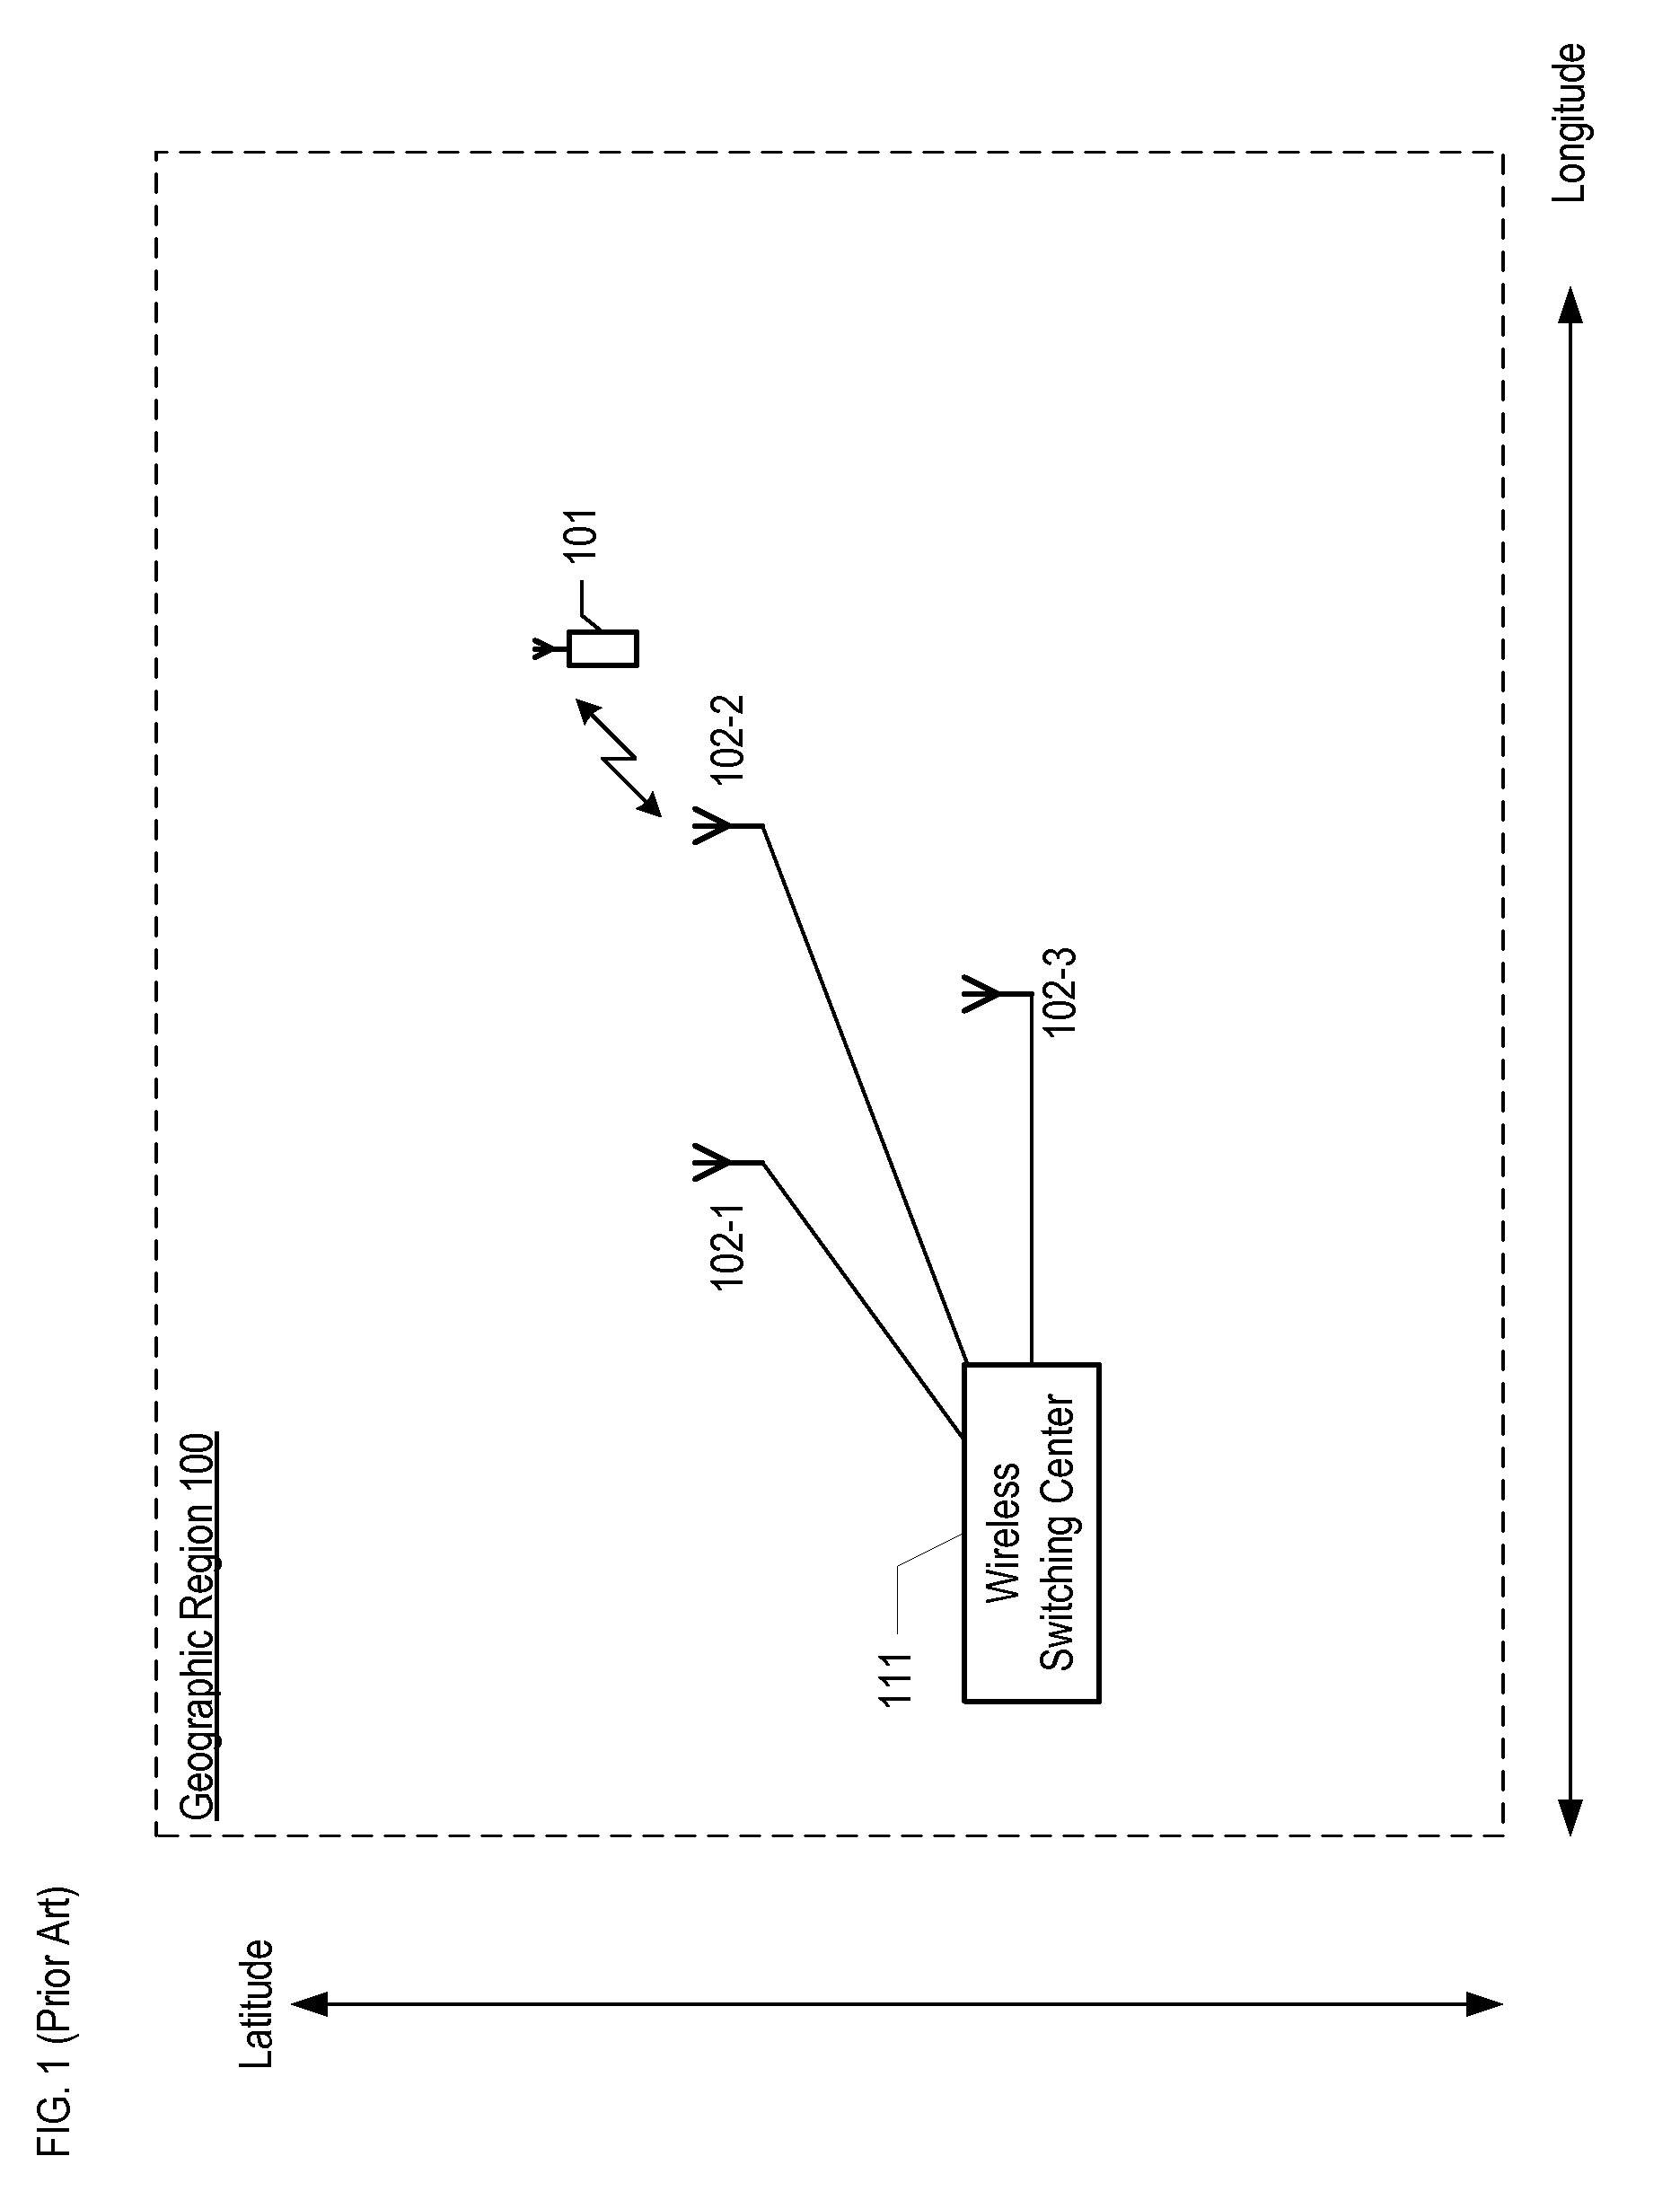 Location estimation of wireless terminals through pattern matching of signal-strength differentials